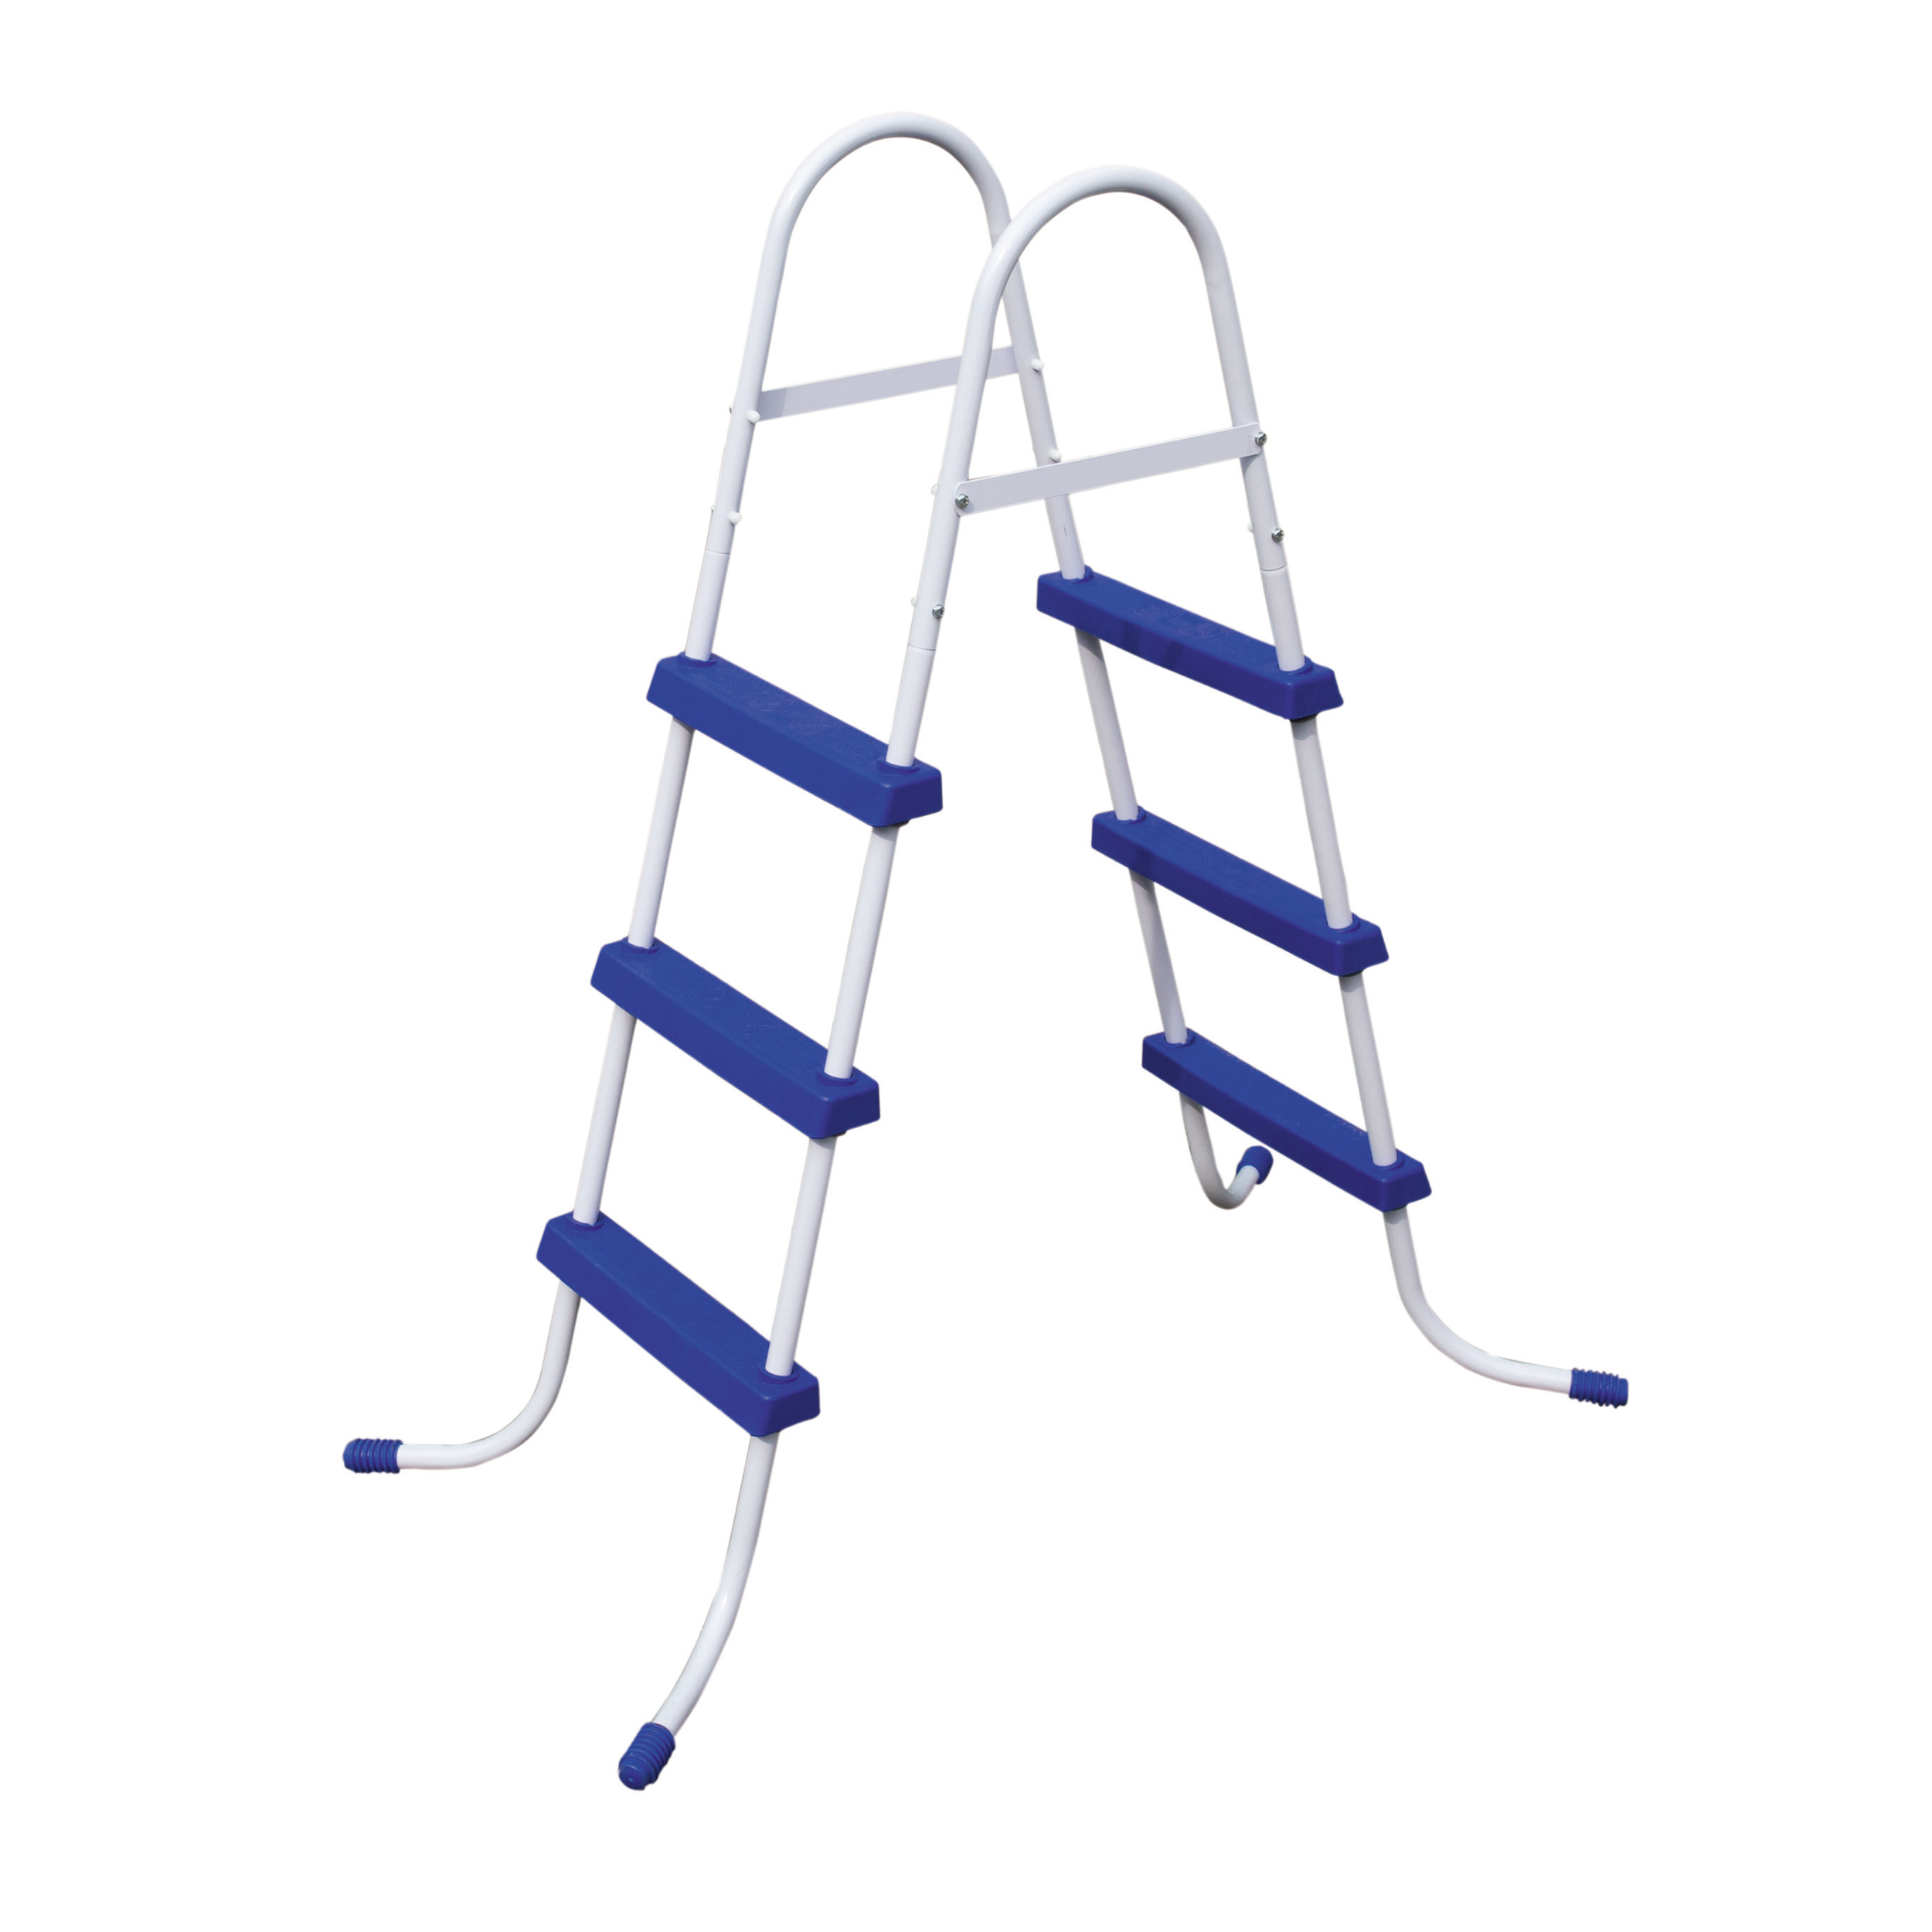 UPC 821808583355 product image for Pool Ladder, 42 Inches | upcitemdb.com